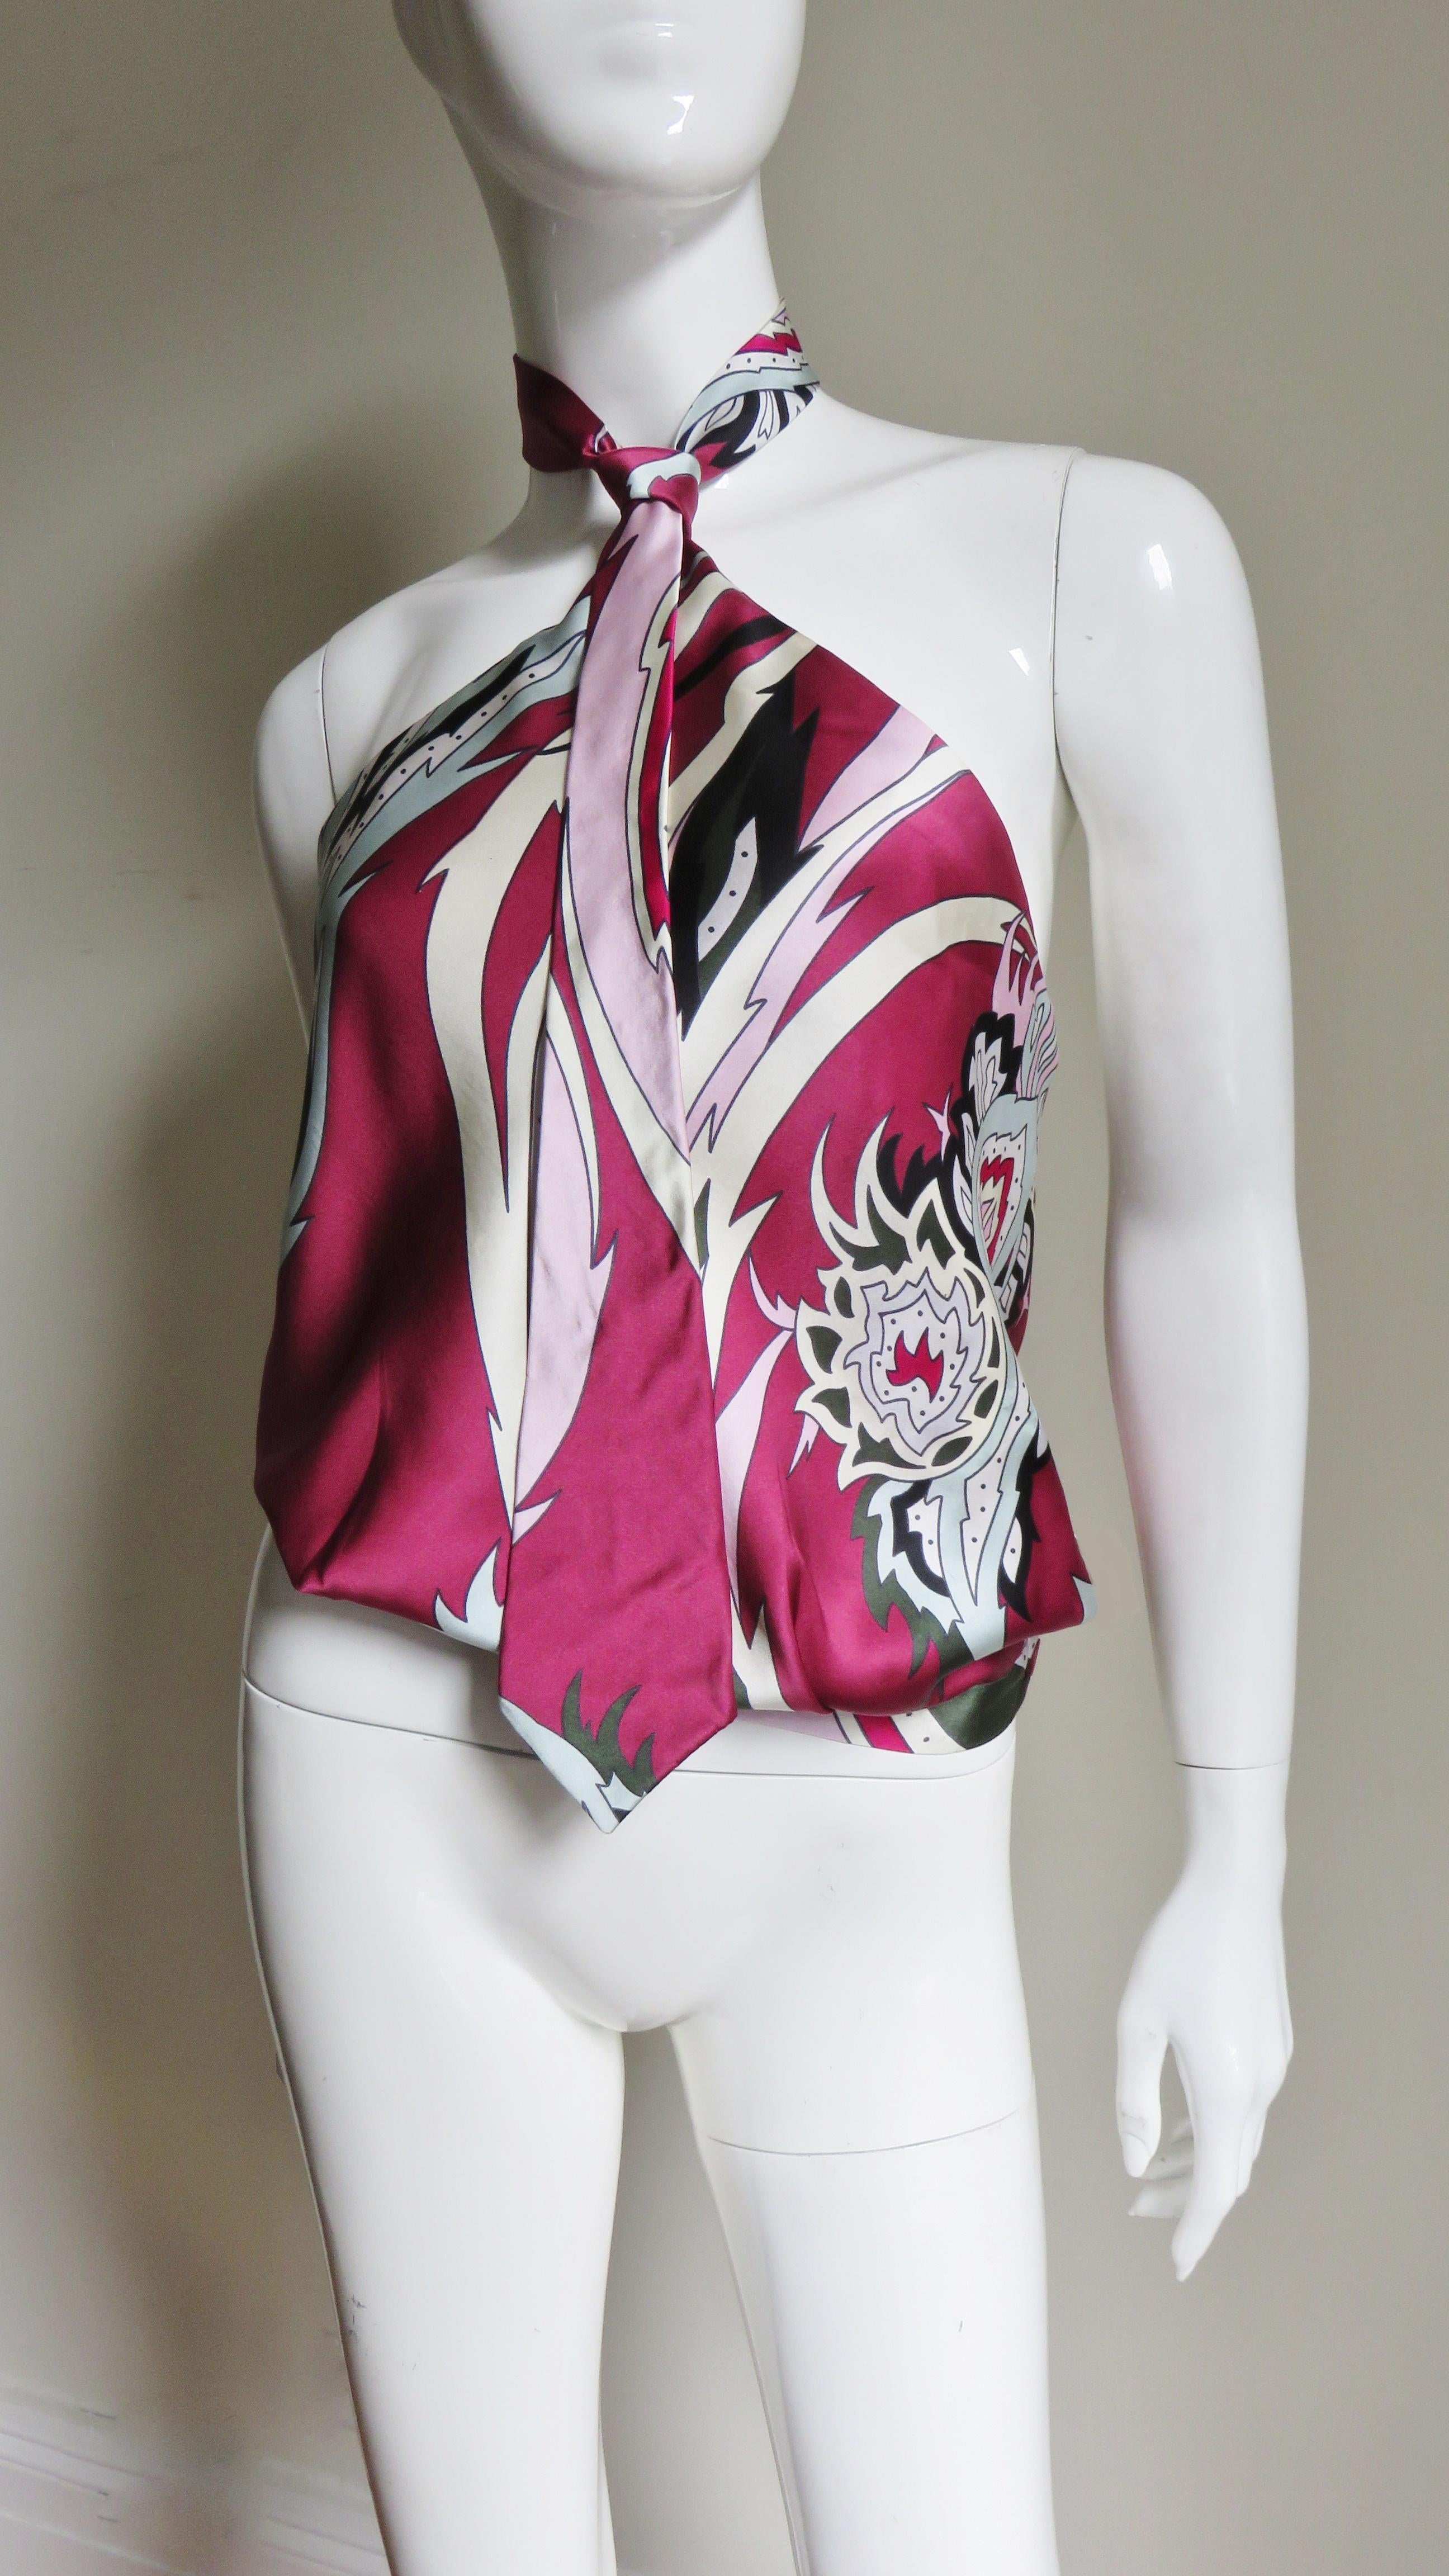 A gorgeous silk halter top from Alexander McQueen's Spring/Summer 2001 collection in a deep rose, white, pink and black abstract pattern.  It has a functional, adjustable necktie stylized halter strap around the neck, a blouson body and a horizontal